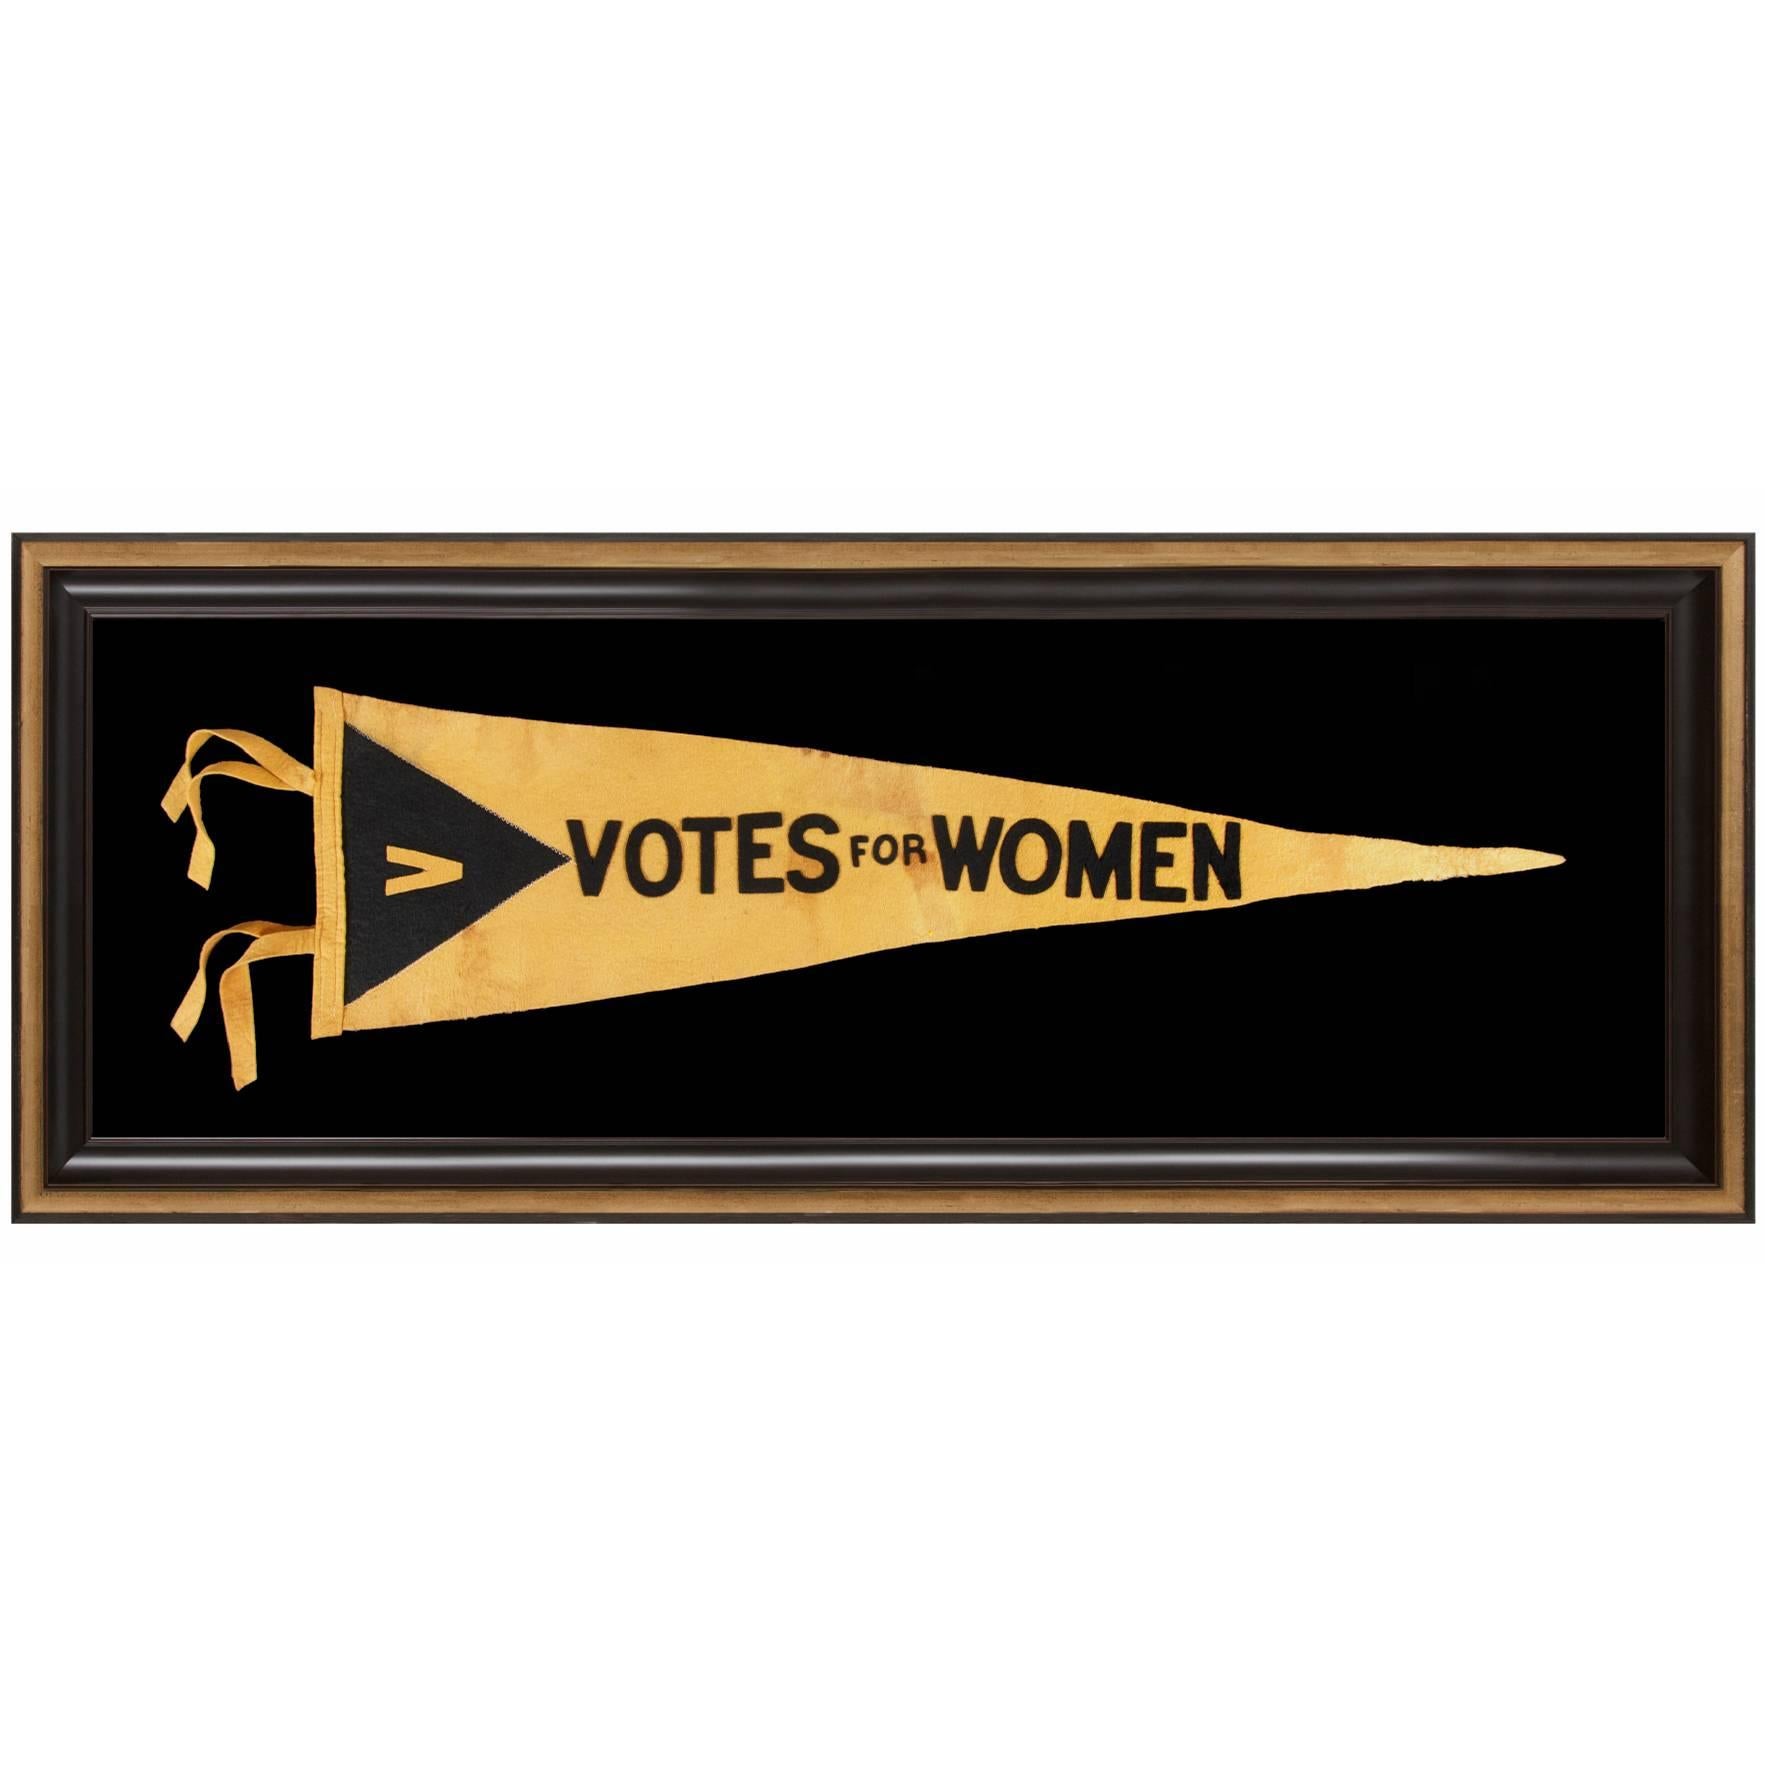 Rare Large Suffragette / Votes for Women Pennant, Elongated Format, 1910-1920